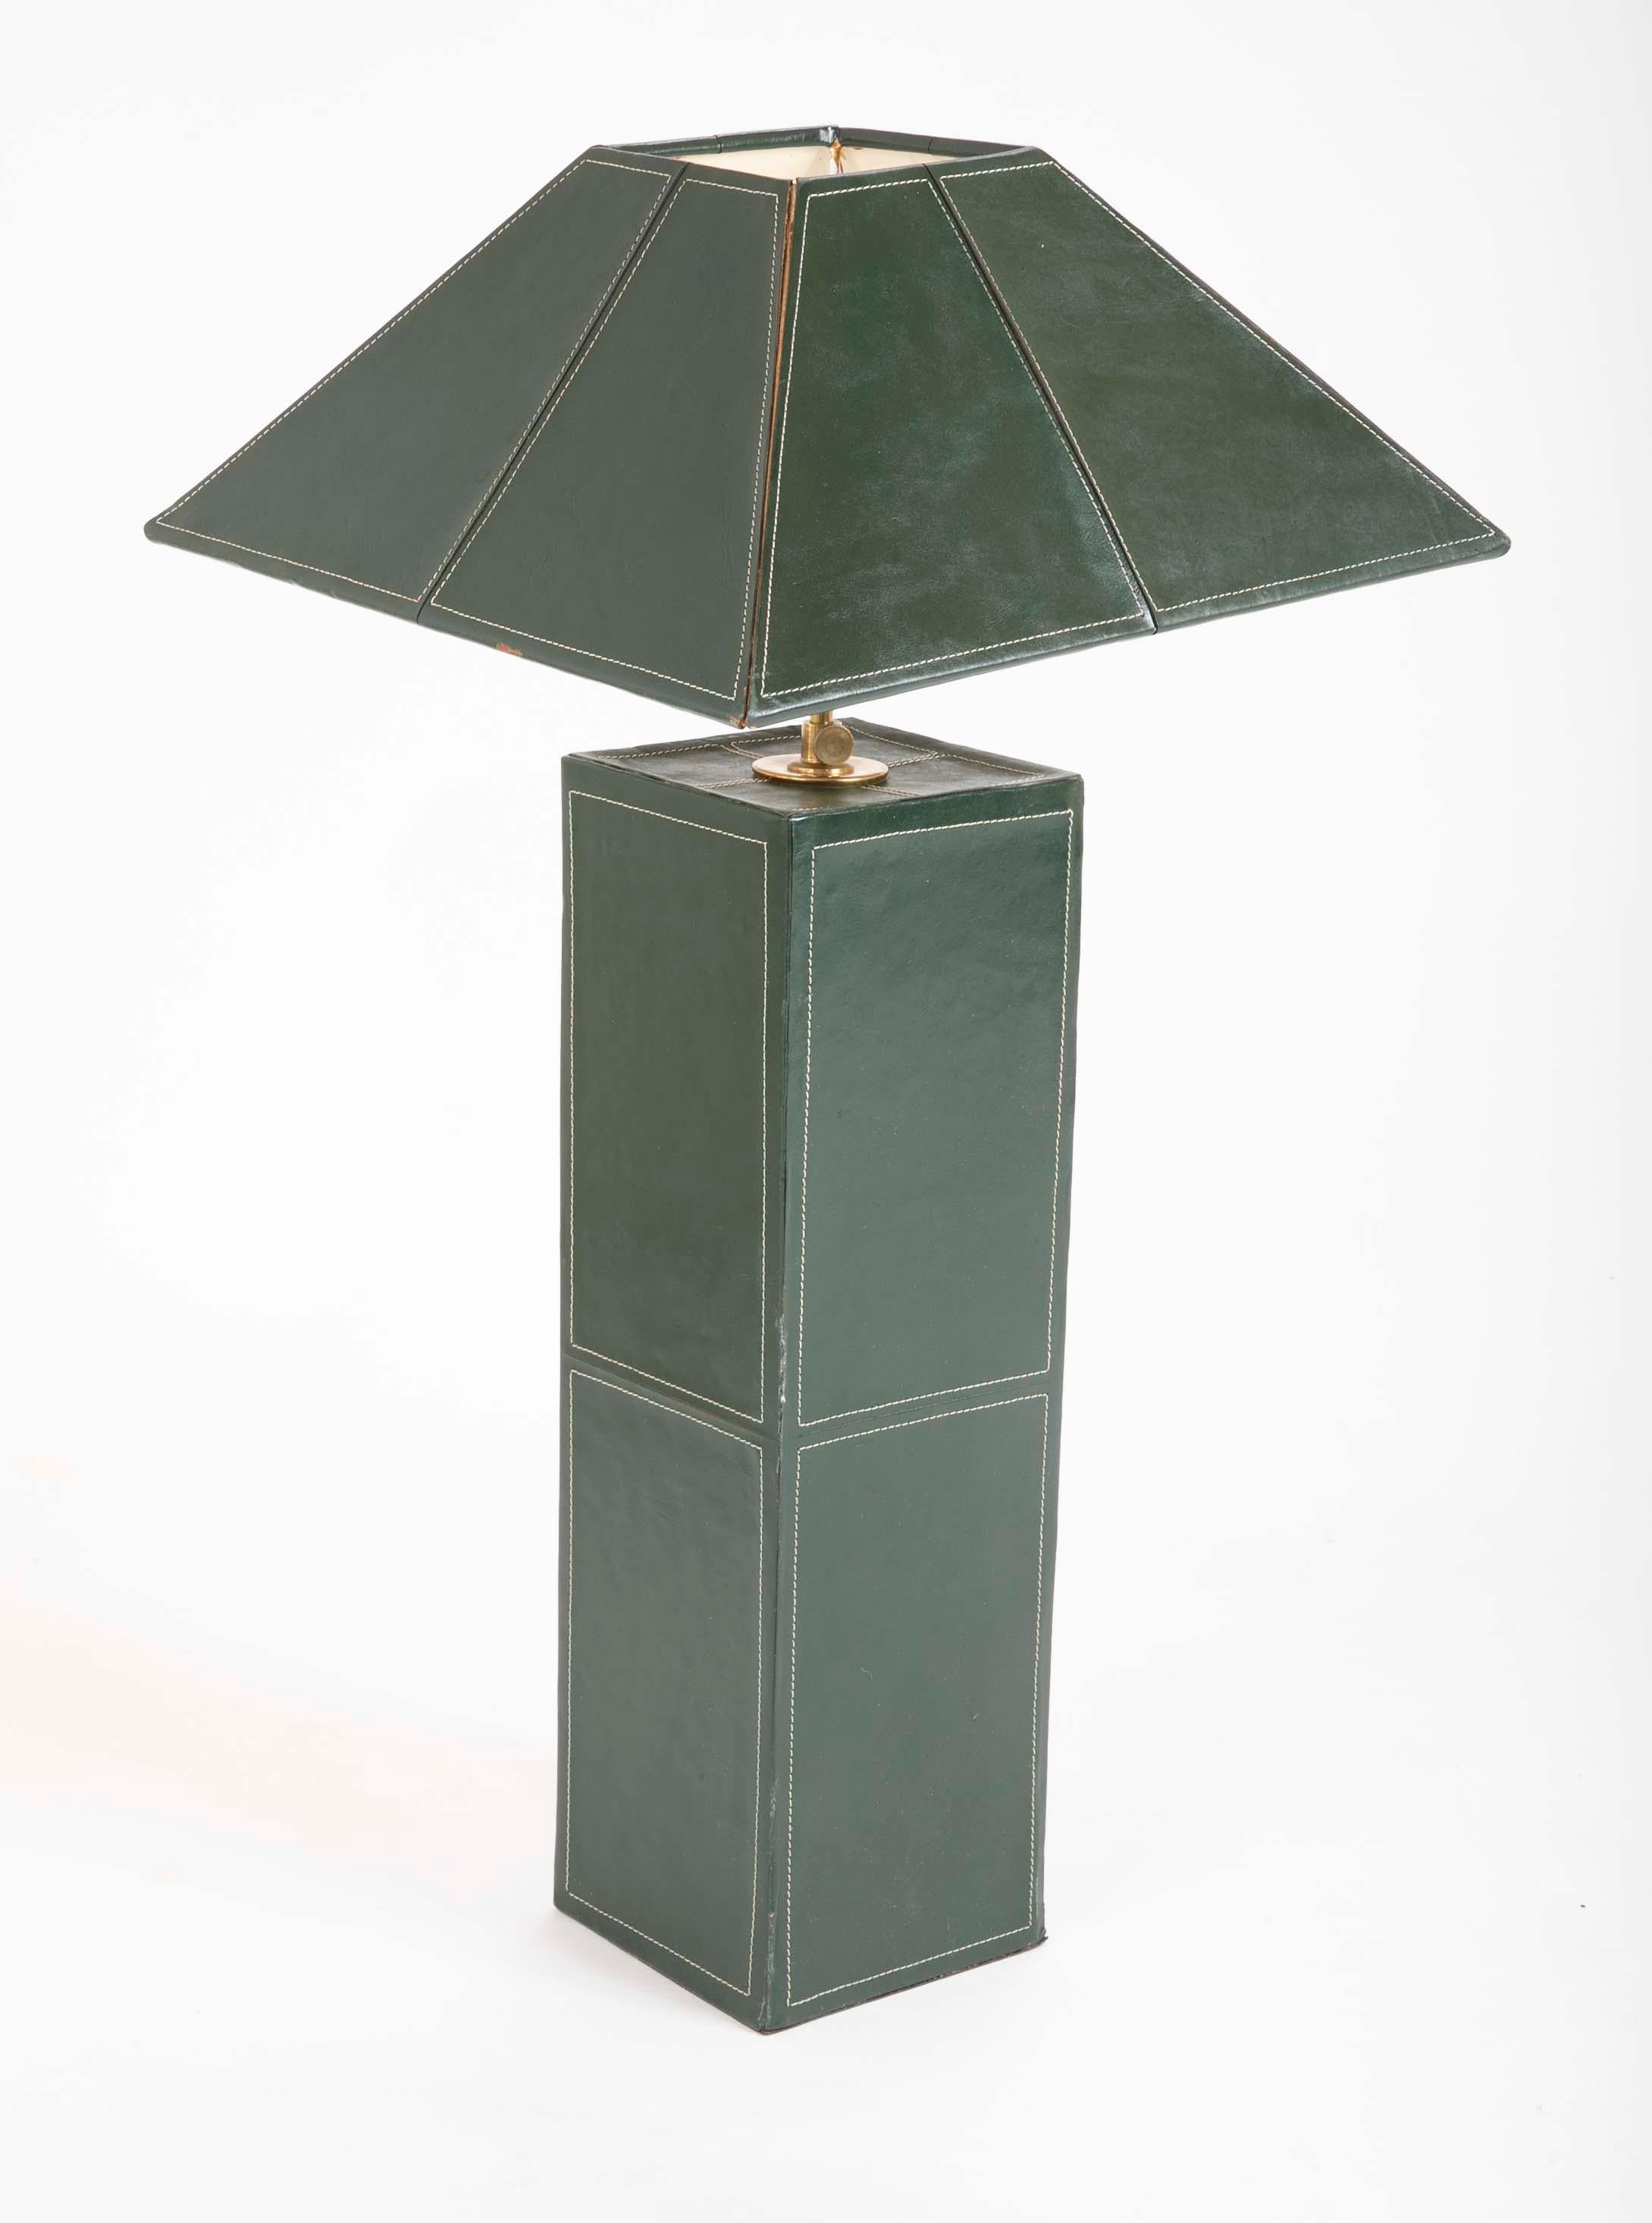 French Pair of Leather Covered Lamps in the Manner of Jacques Adnet